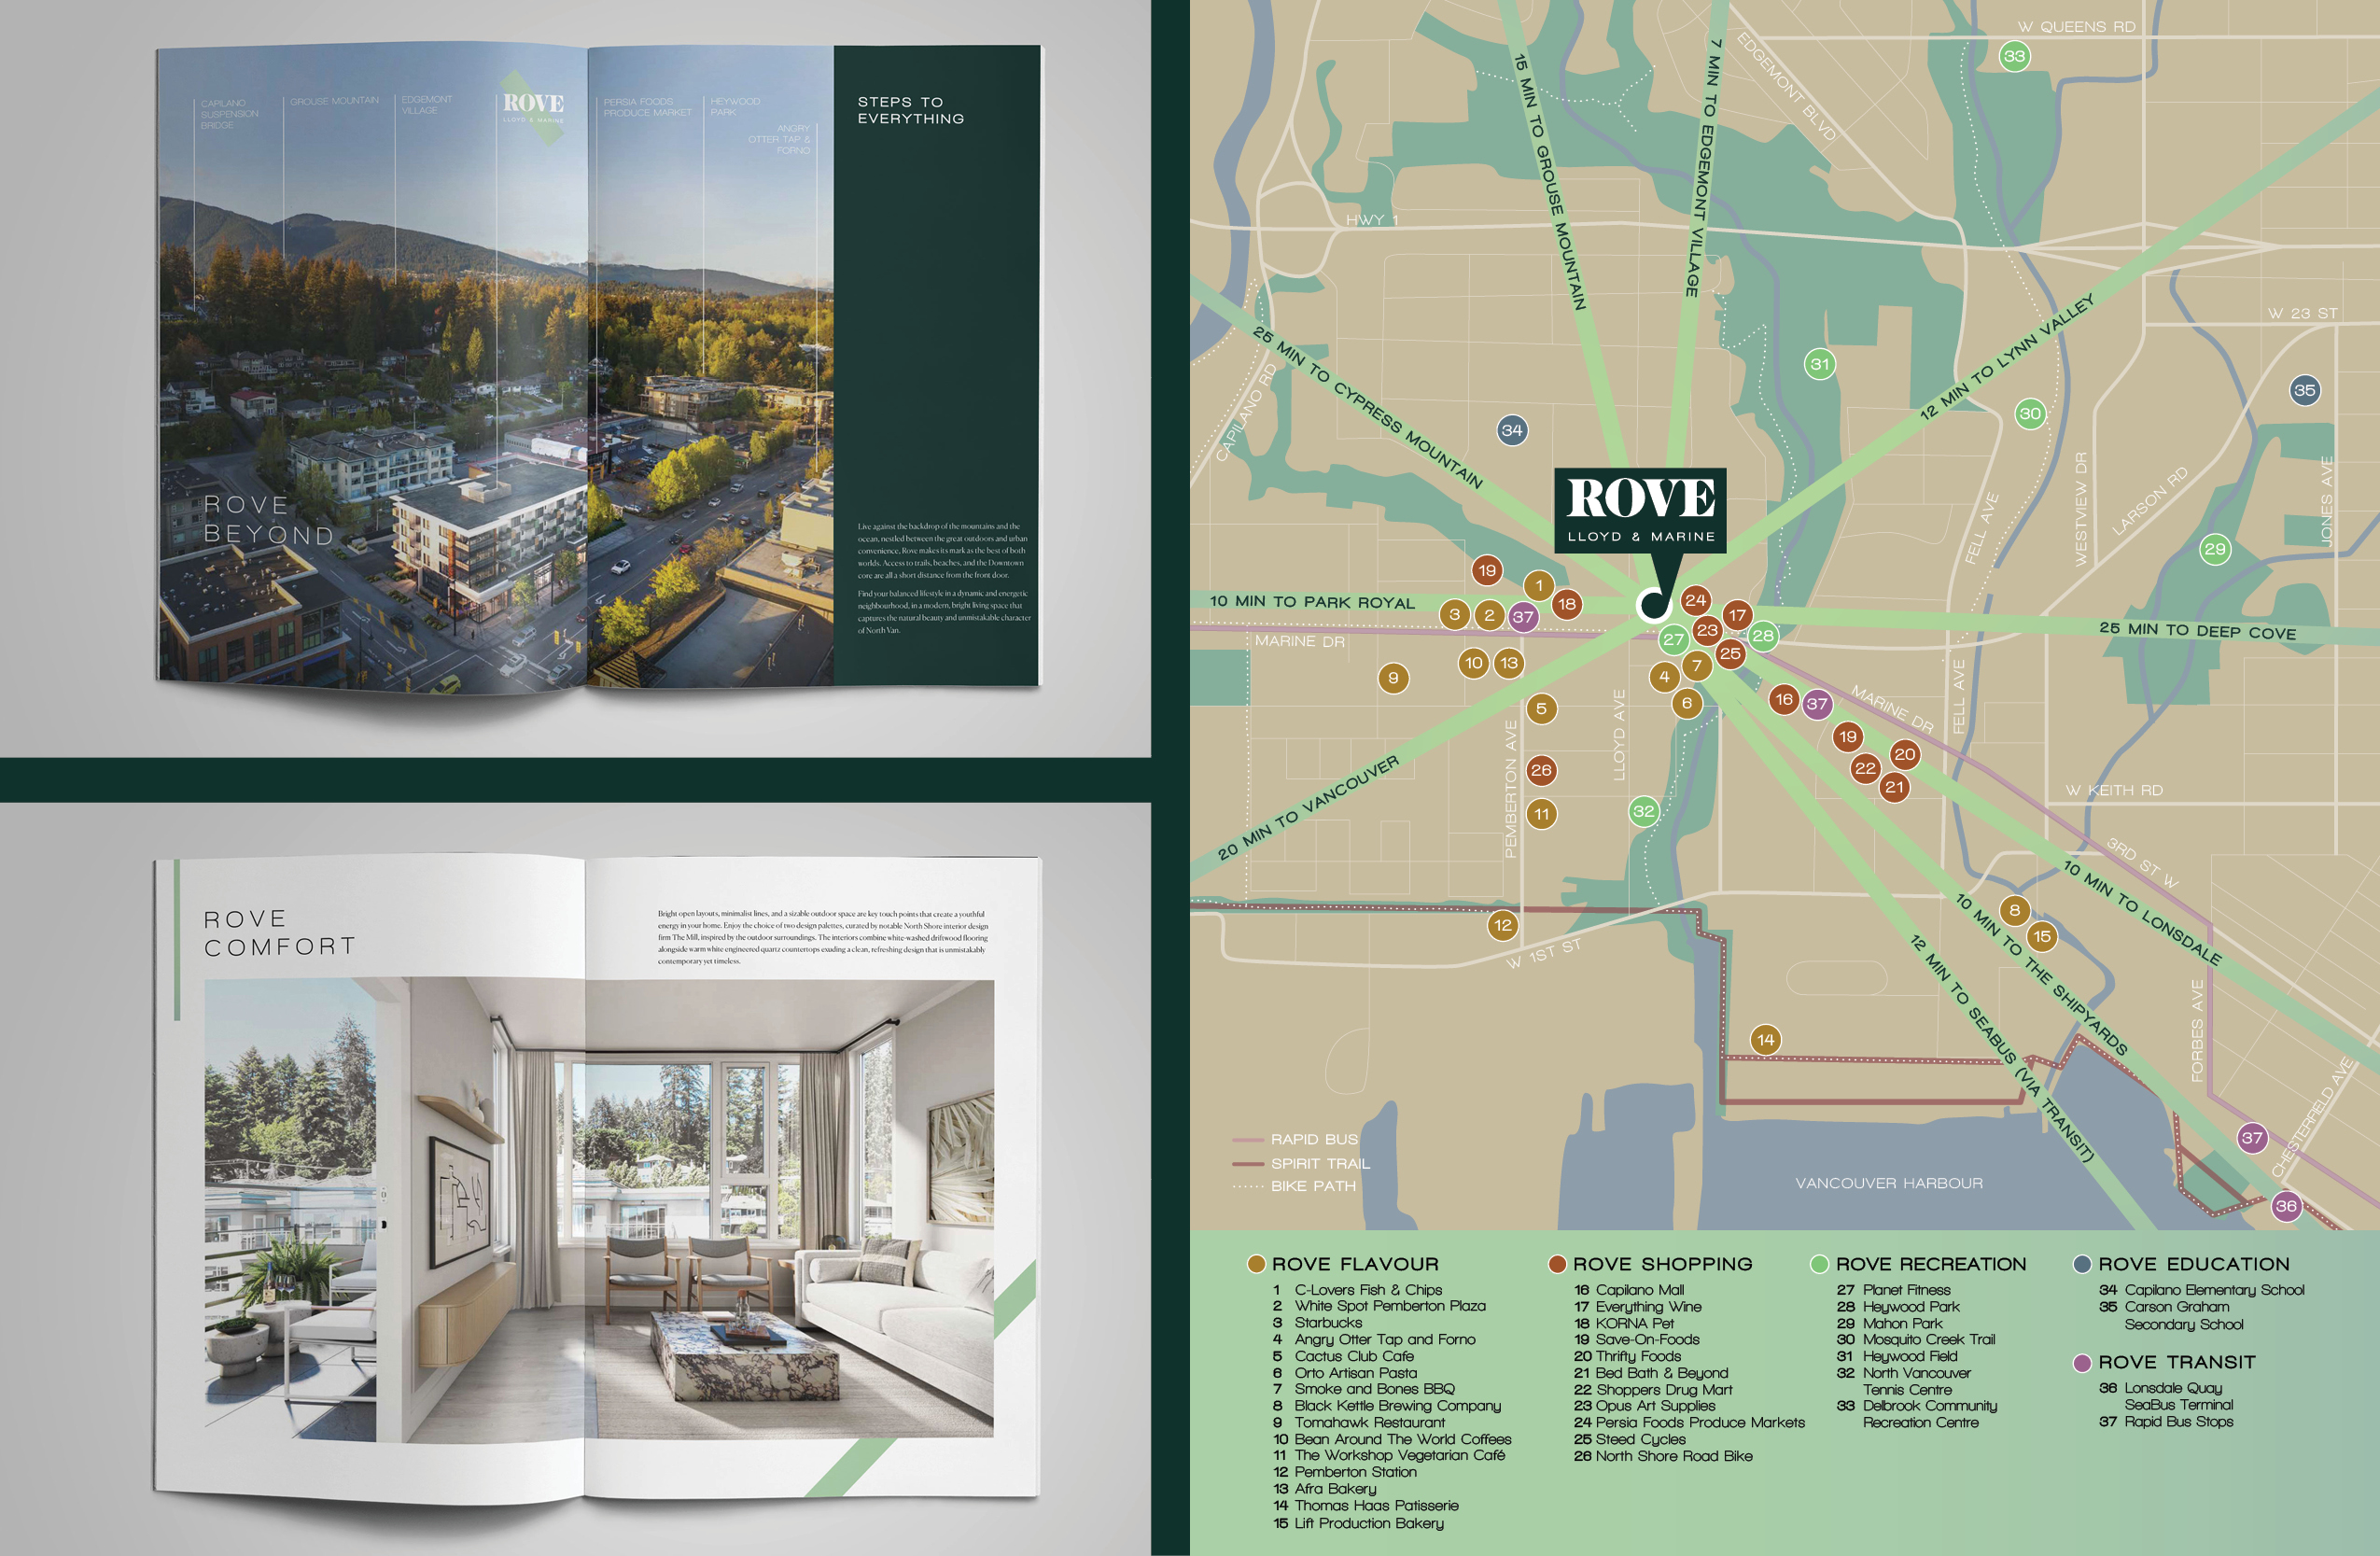 Rove Brochure and Map